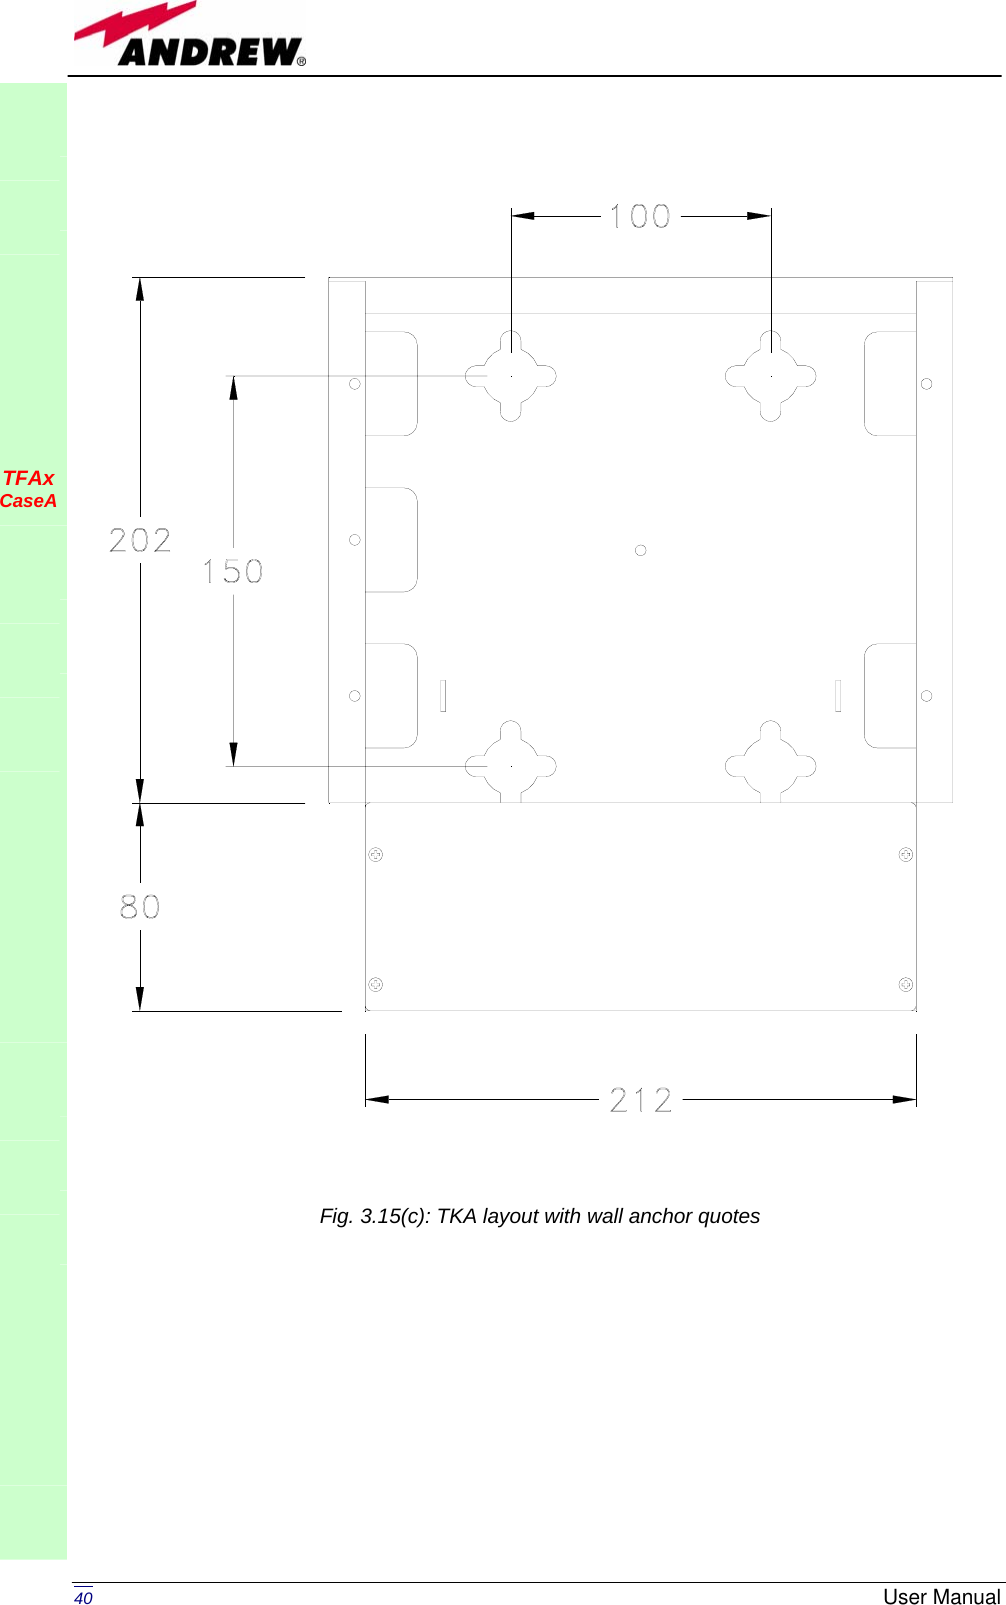   40  User Manual                                                              TFAx CaseA               Fig. 3.15(c): TKA layout with wall anchor quotes 